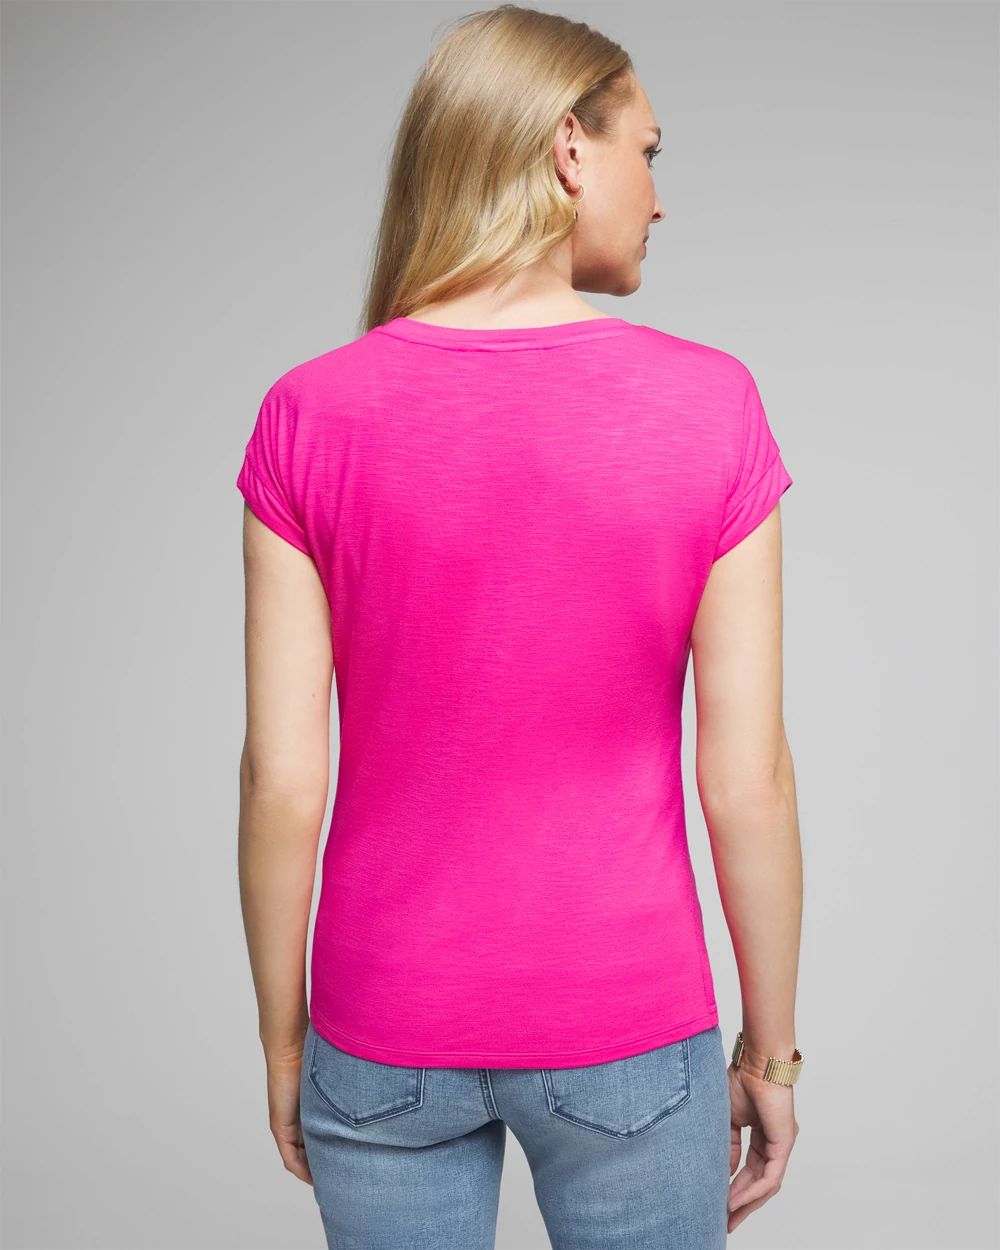 Outlet WHBM Short Sleeve Scoop Neck Tee click to view larger image.